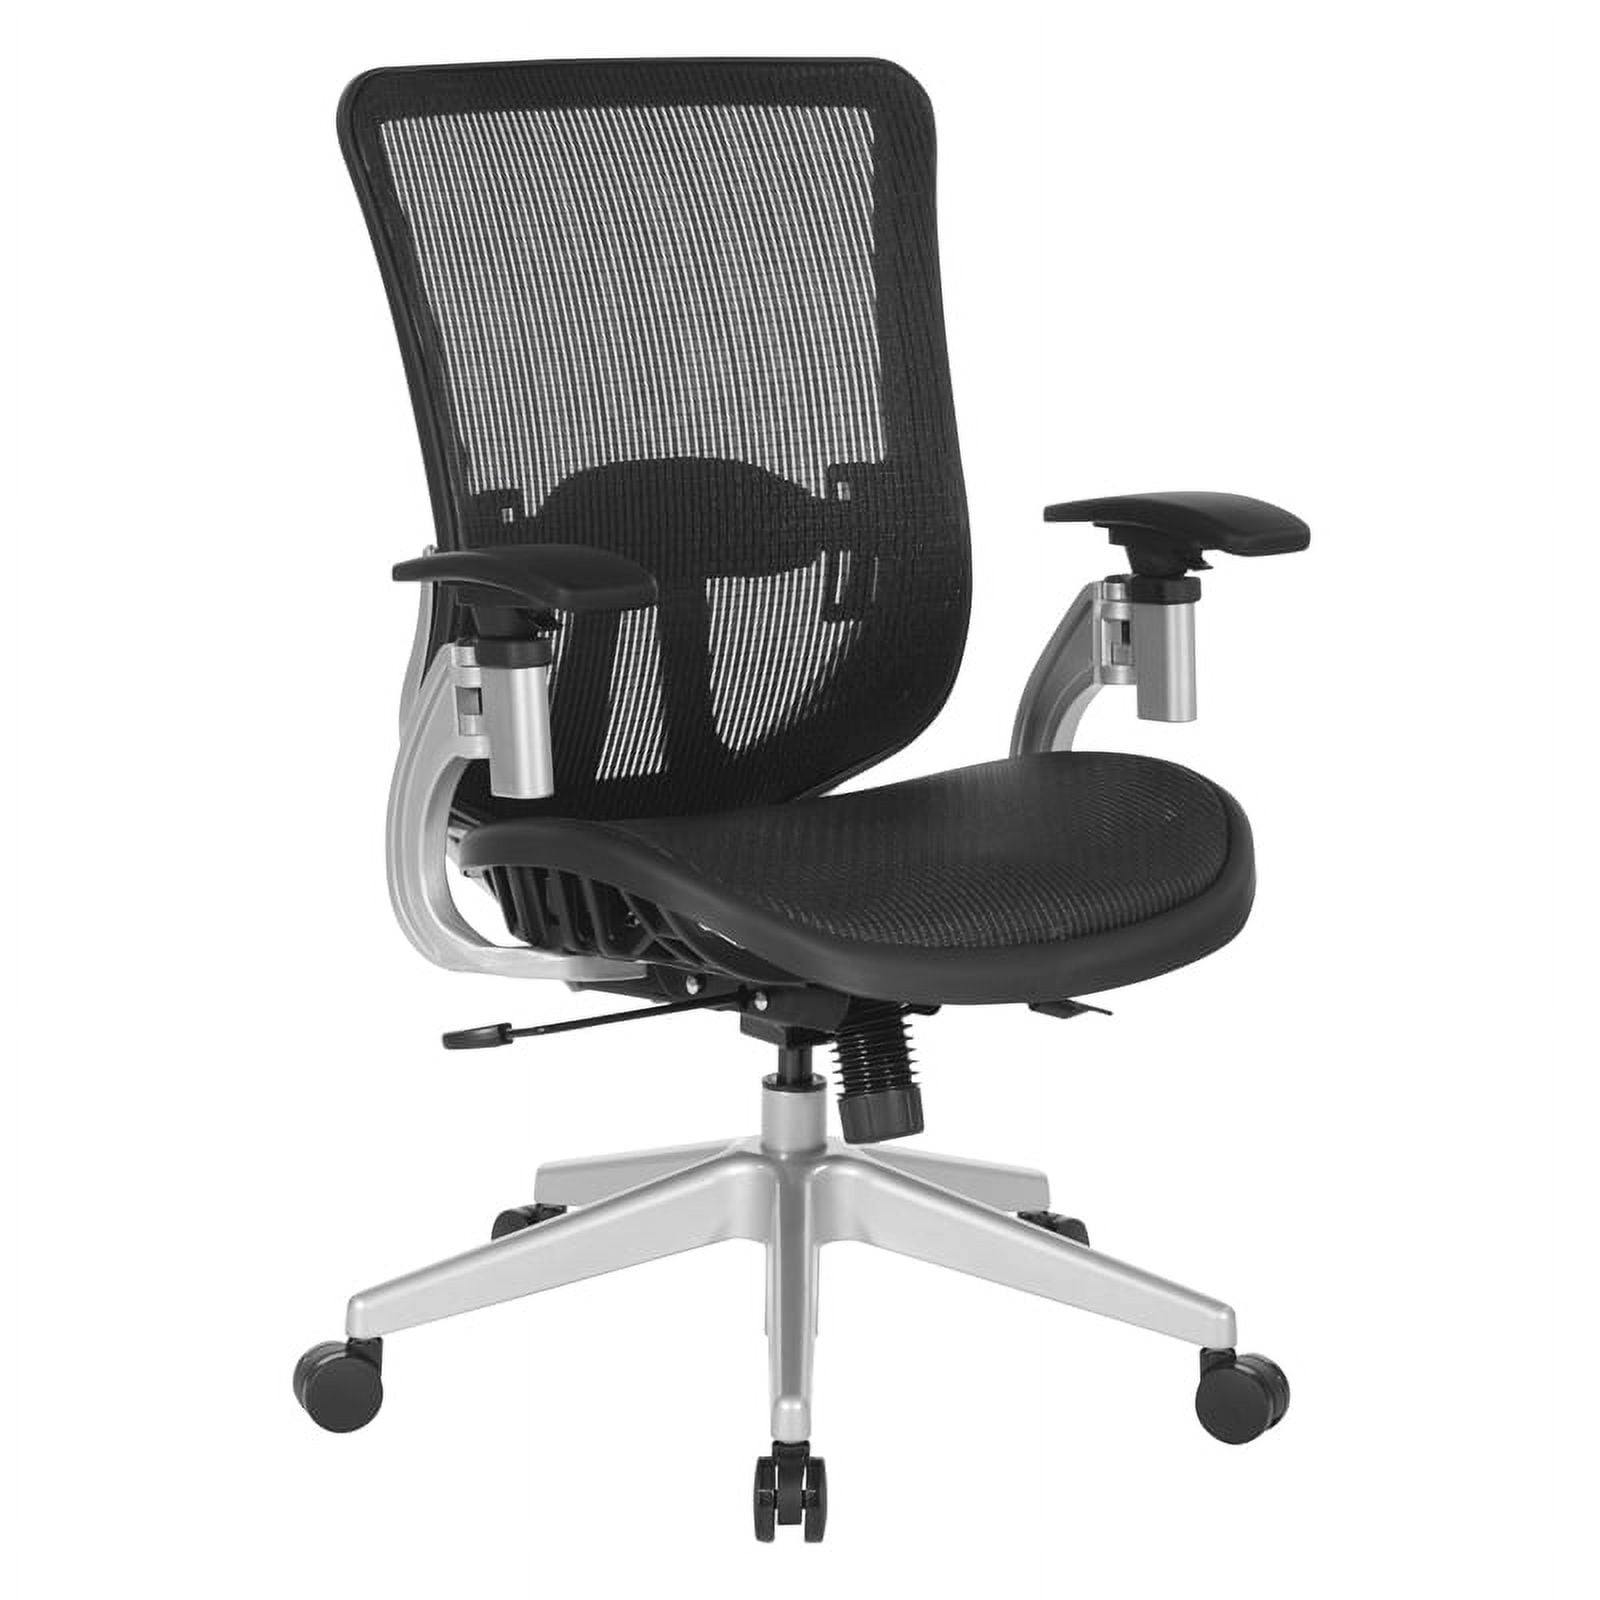 Executive Black Mesh Adjustable Office Chair with Lumbar Support